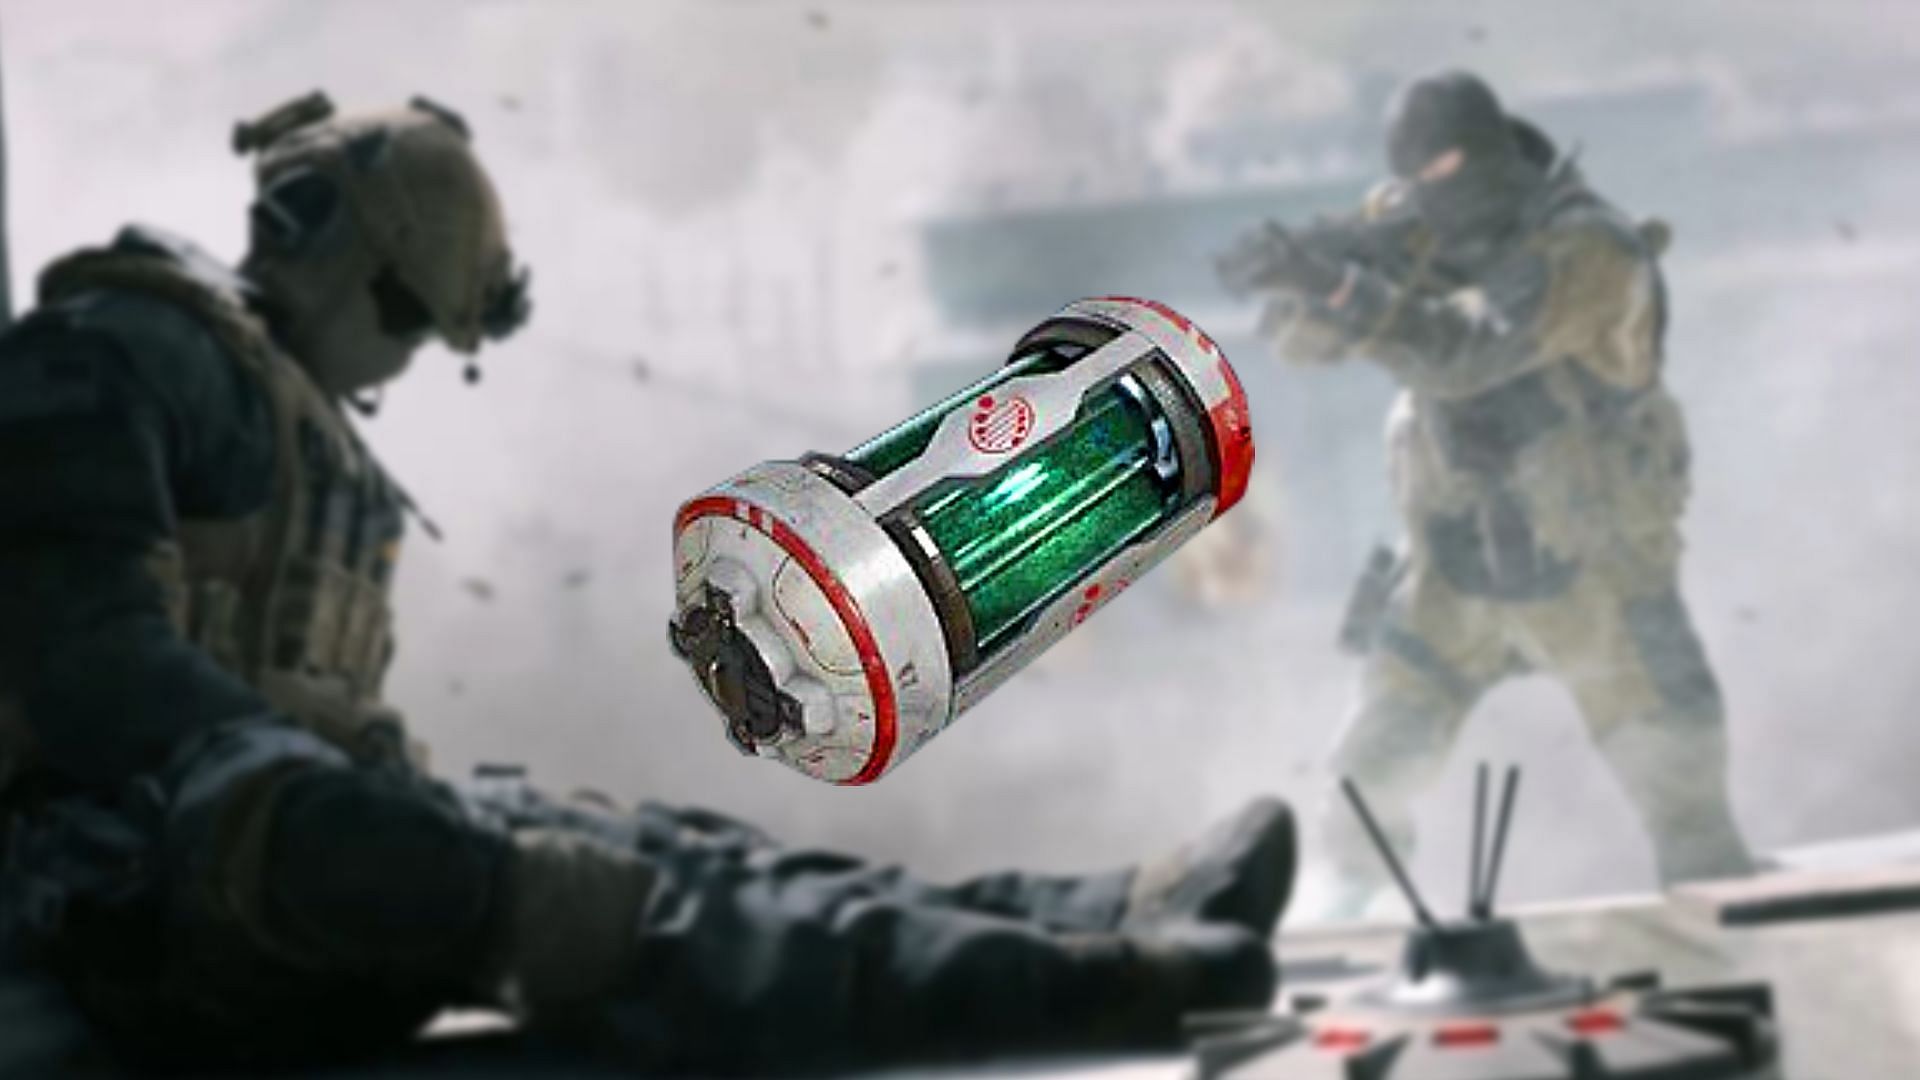 DNA Bomb killstreak from Advanced Warfare rumored to arrive in MW3 and Warzone (Image via Activision)